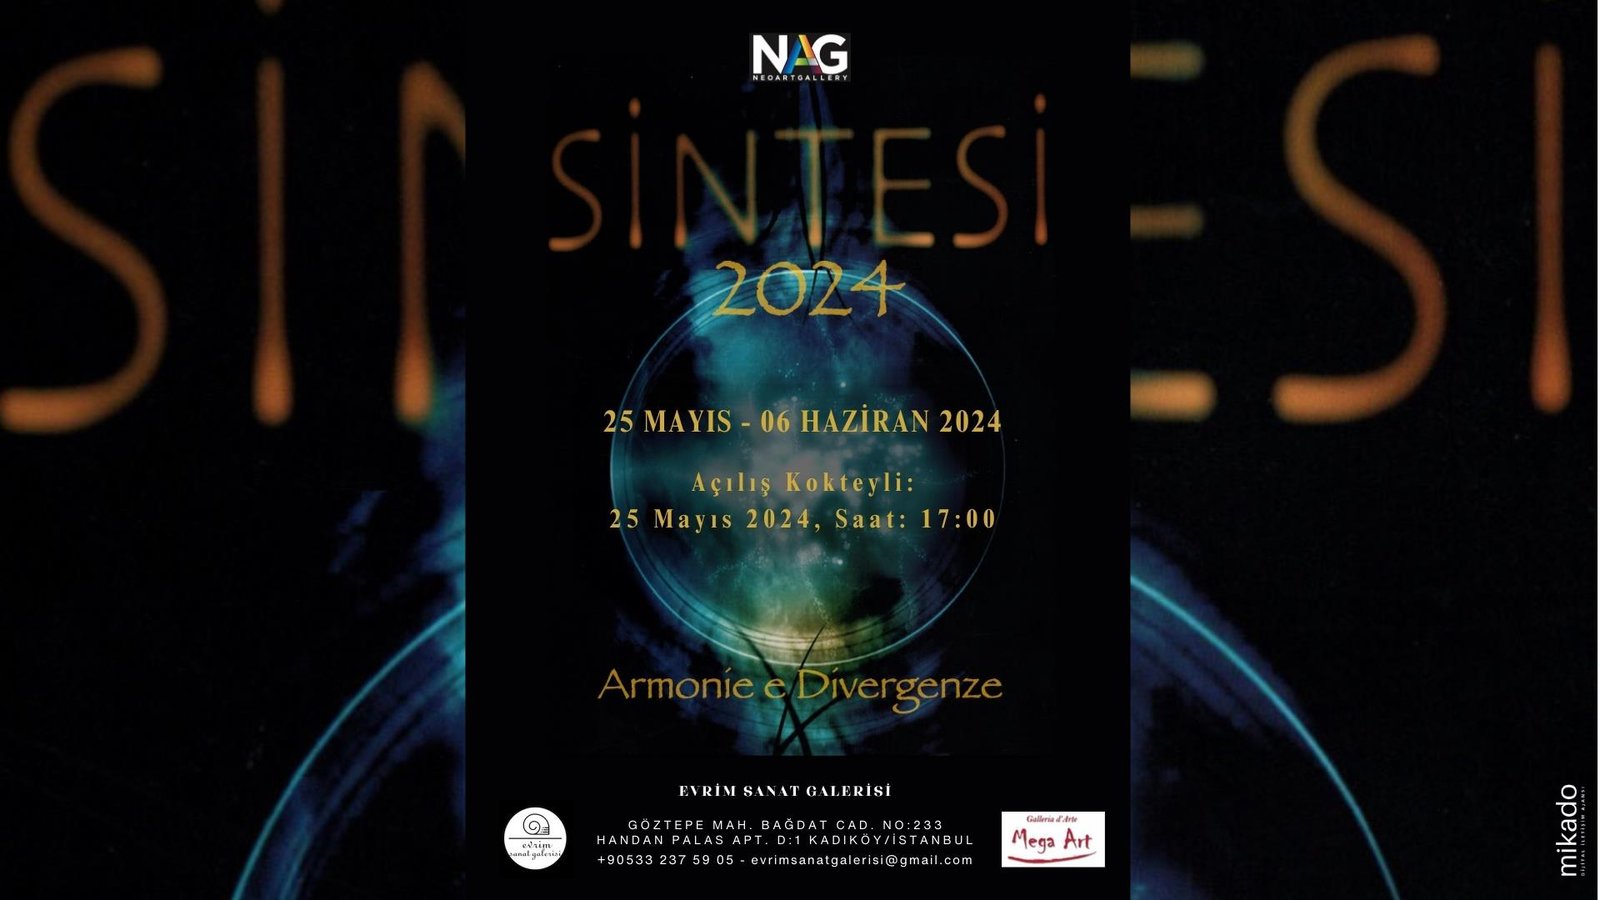 Following The Trail Of Cultural Diversity The 13th Edition Of The Sintesi Exhibition Has Begun!